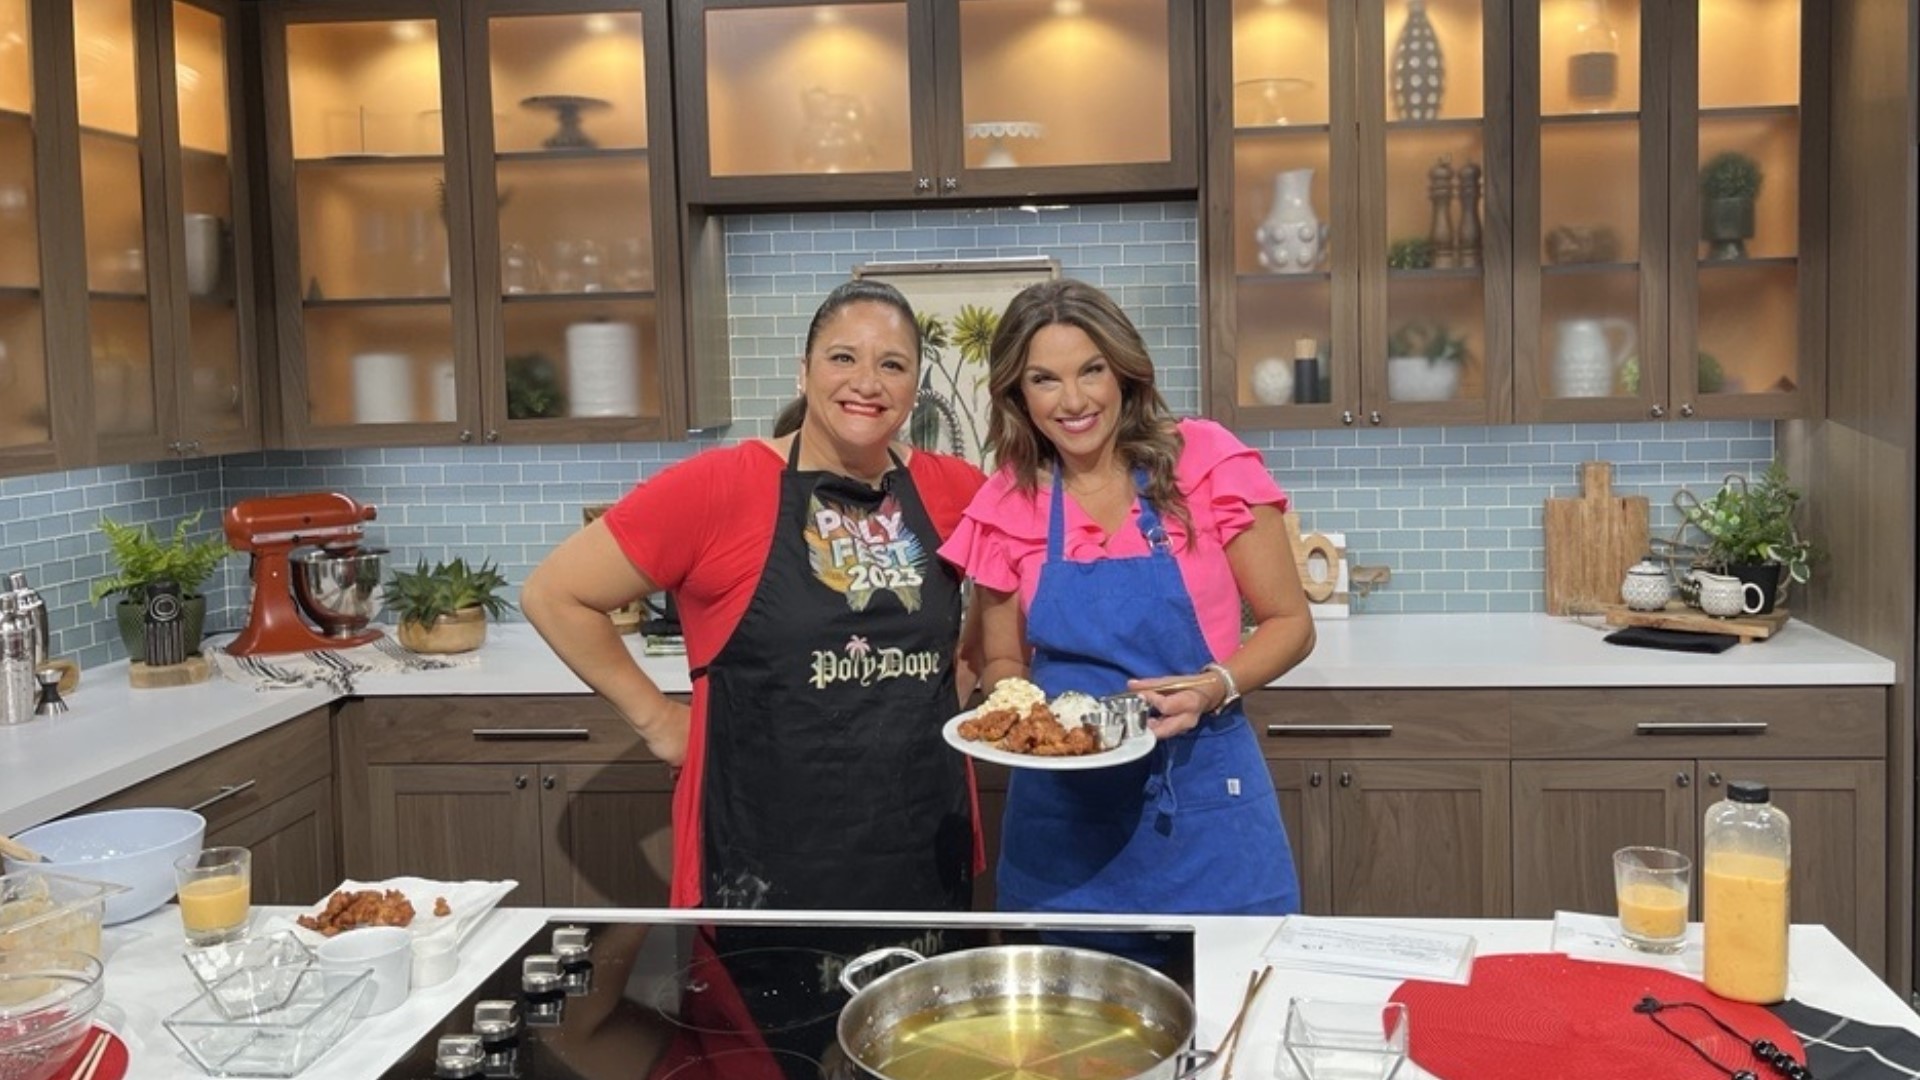 Angie Mose shows Amity how to make Mochiko Chicken, a traditional Hawaiian fried chicken dish. Hawaiians usually pair it with Mac salad and rice.